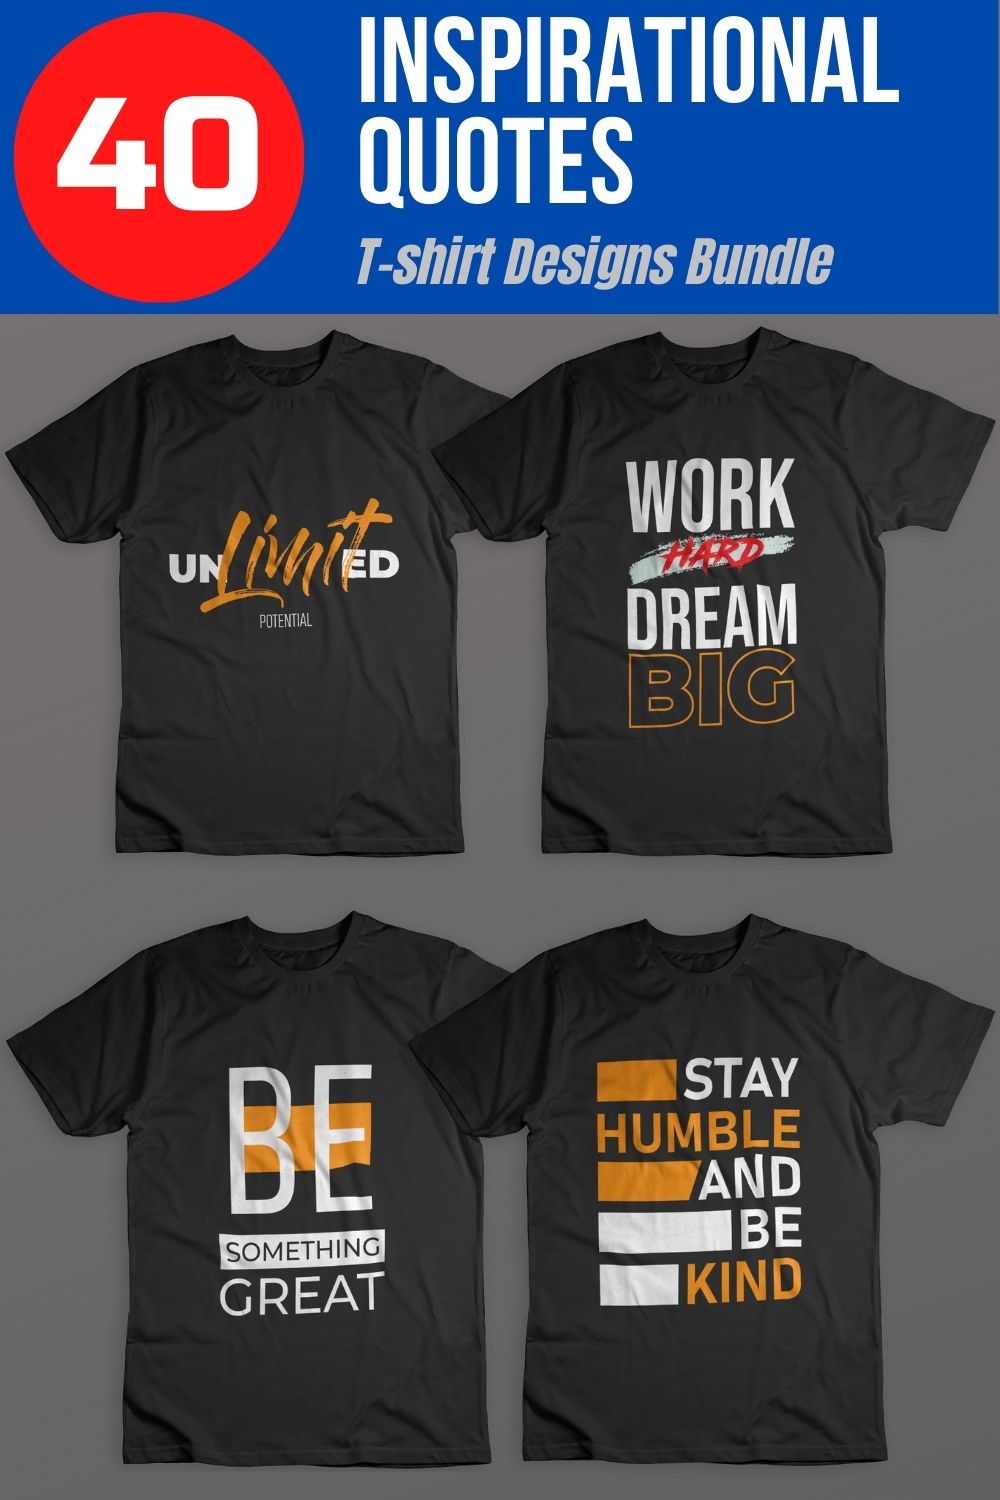 40 Inspirational Quotes Typography T-shirt Designs Bundle pinterest preview image.